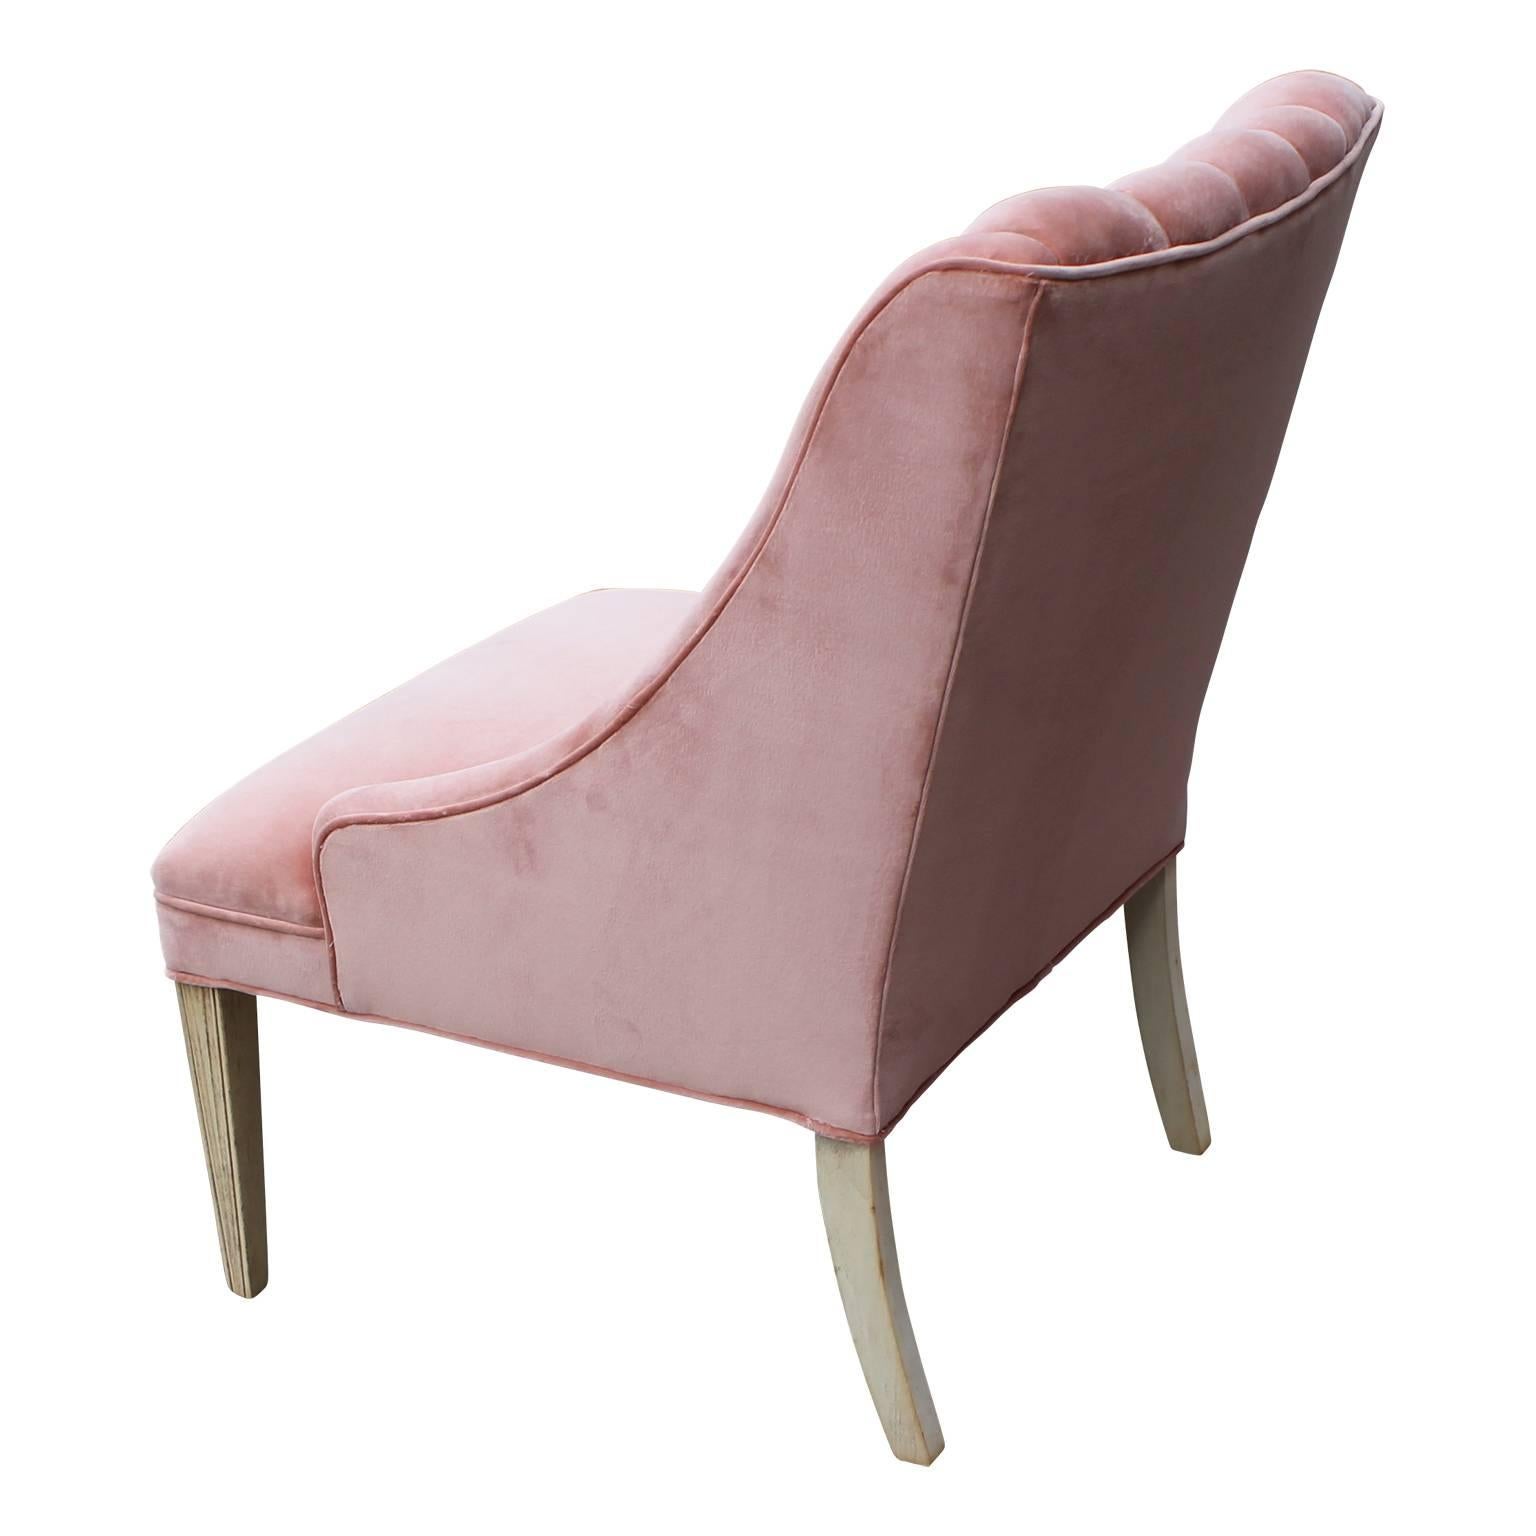 Hollywood Regency Modern Pink Velvet and Bleached Wood Dunbar Style Channeled Lounge Chair